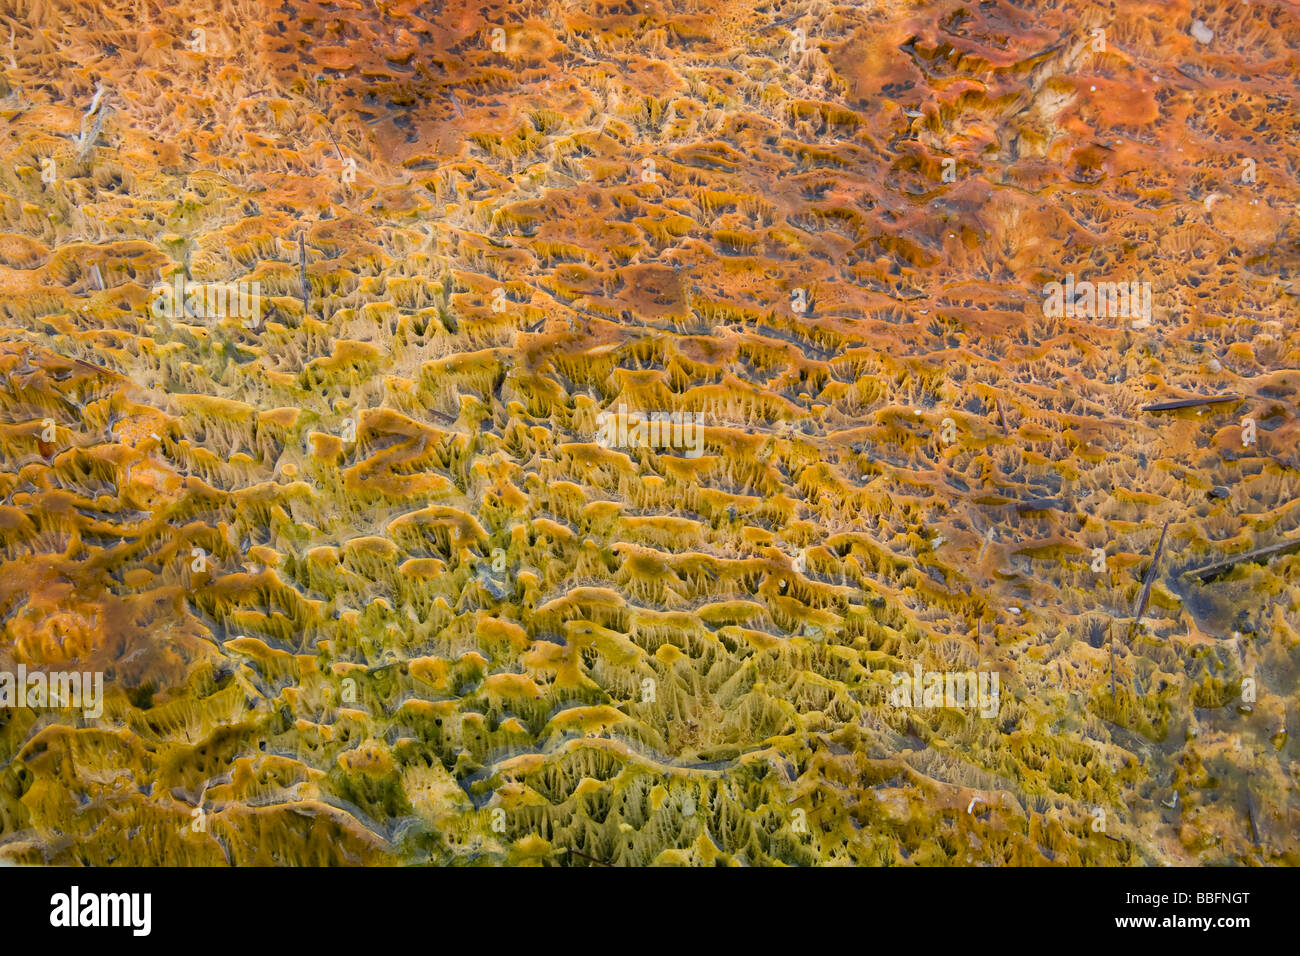 Closeup of Thermophilic bacterial growth at Geyser, textured and colourful Stock Photo